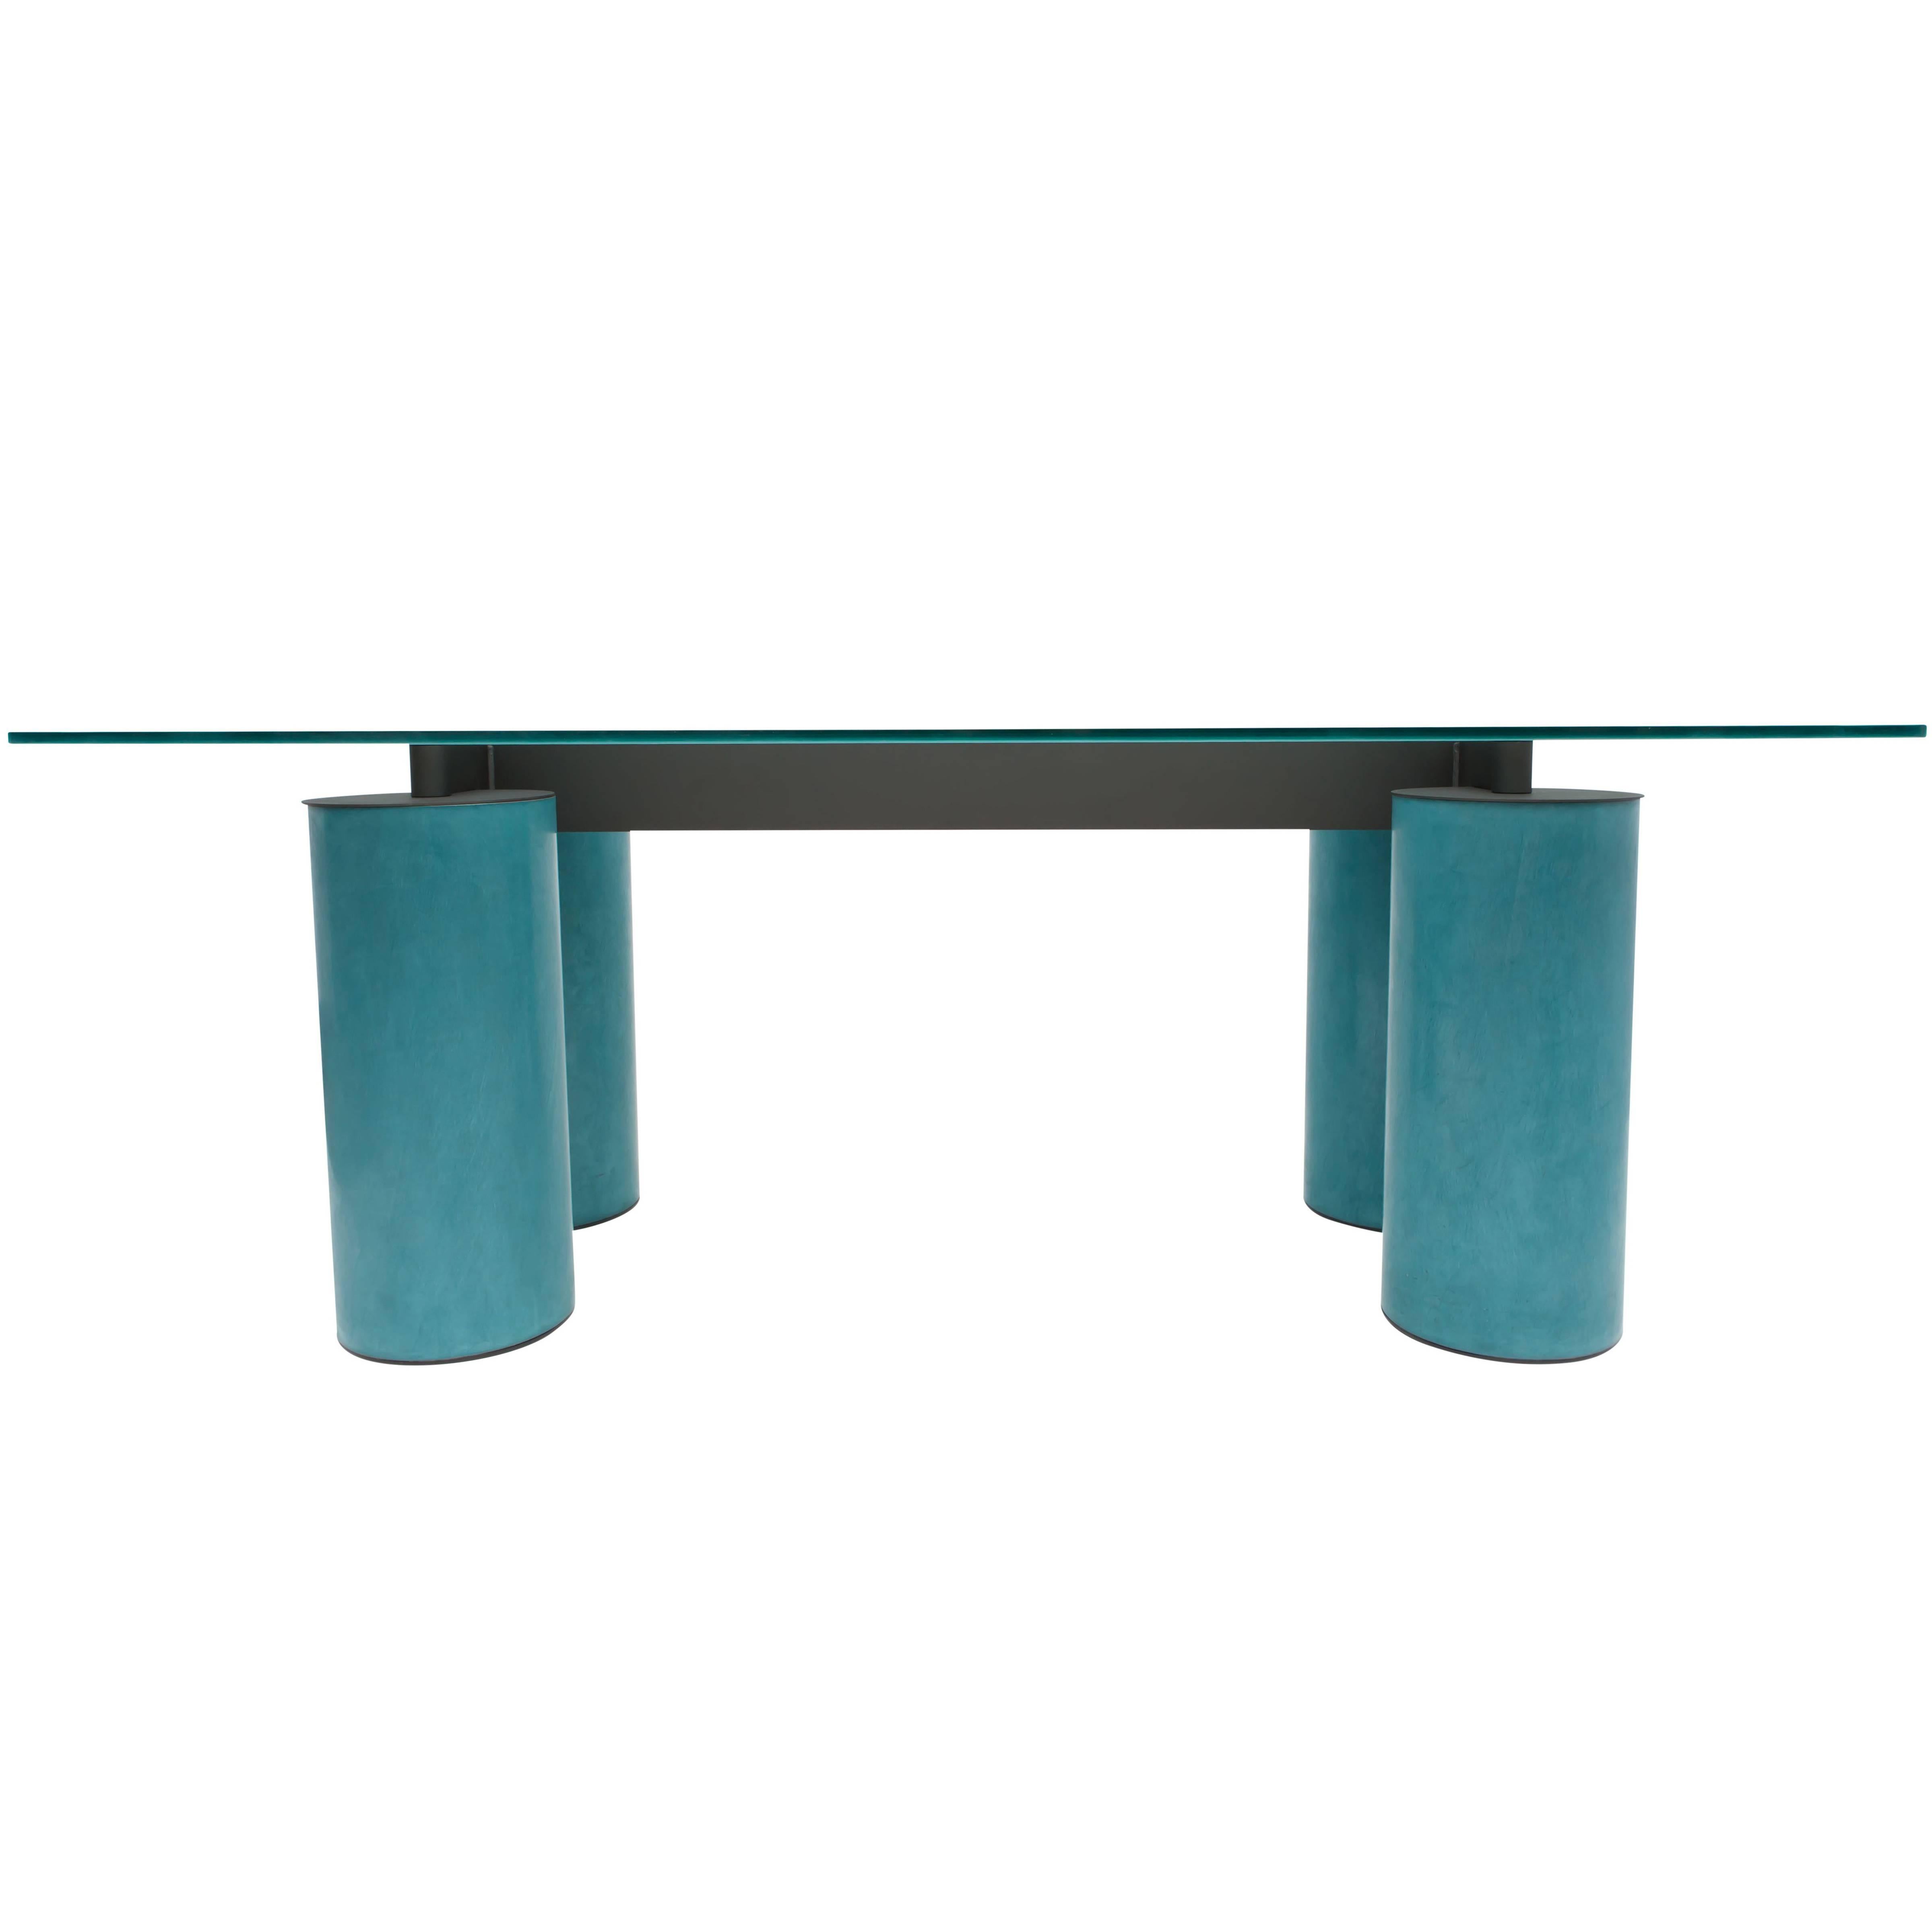 Turquoise desk or table manufactured by Acerbis and designed by David Law, Lella and Massimo Vignelli.
An opalescent crystal top on a turquoise cylindrical base.
Measures: H 72 cm x D 100 cm x W 200 cm.